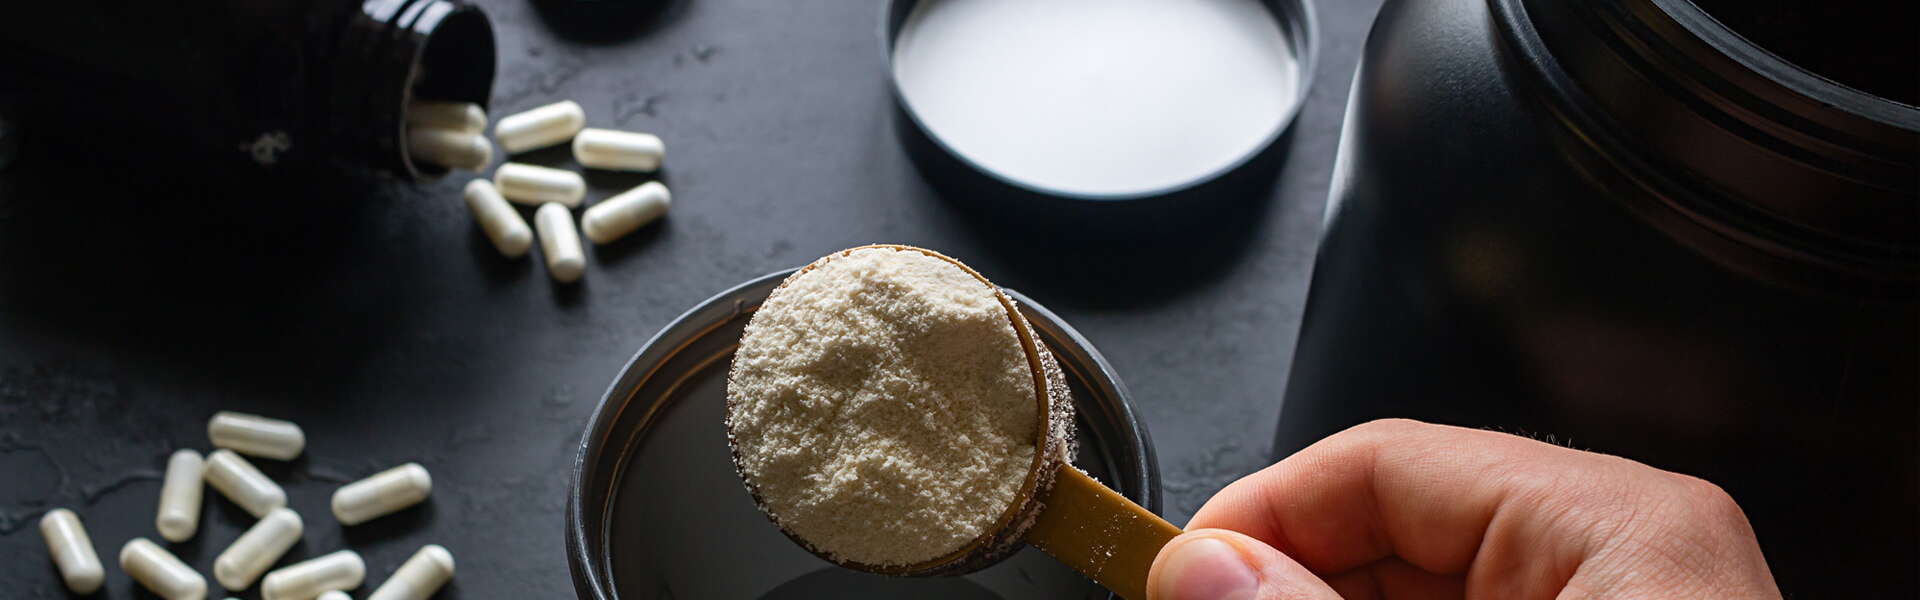 Creatine in sports: use, benefits and side effects